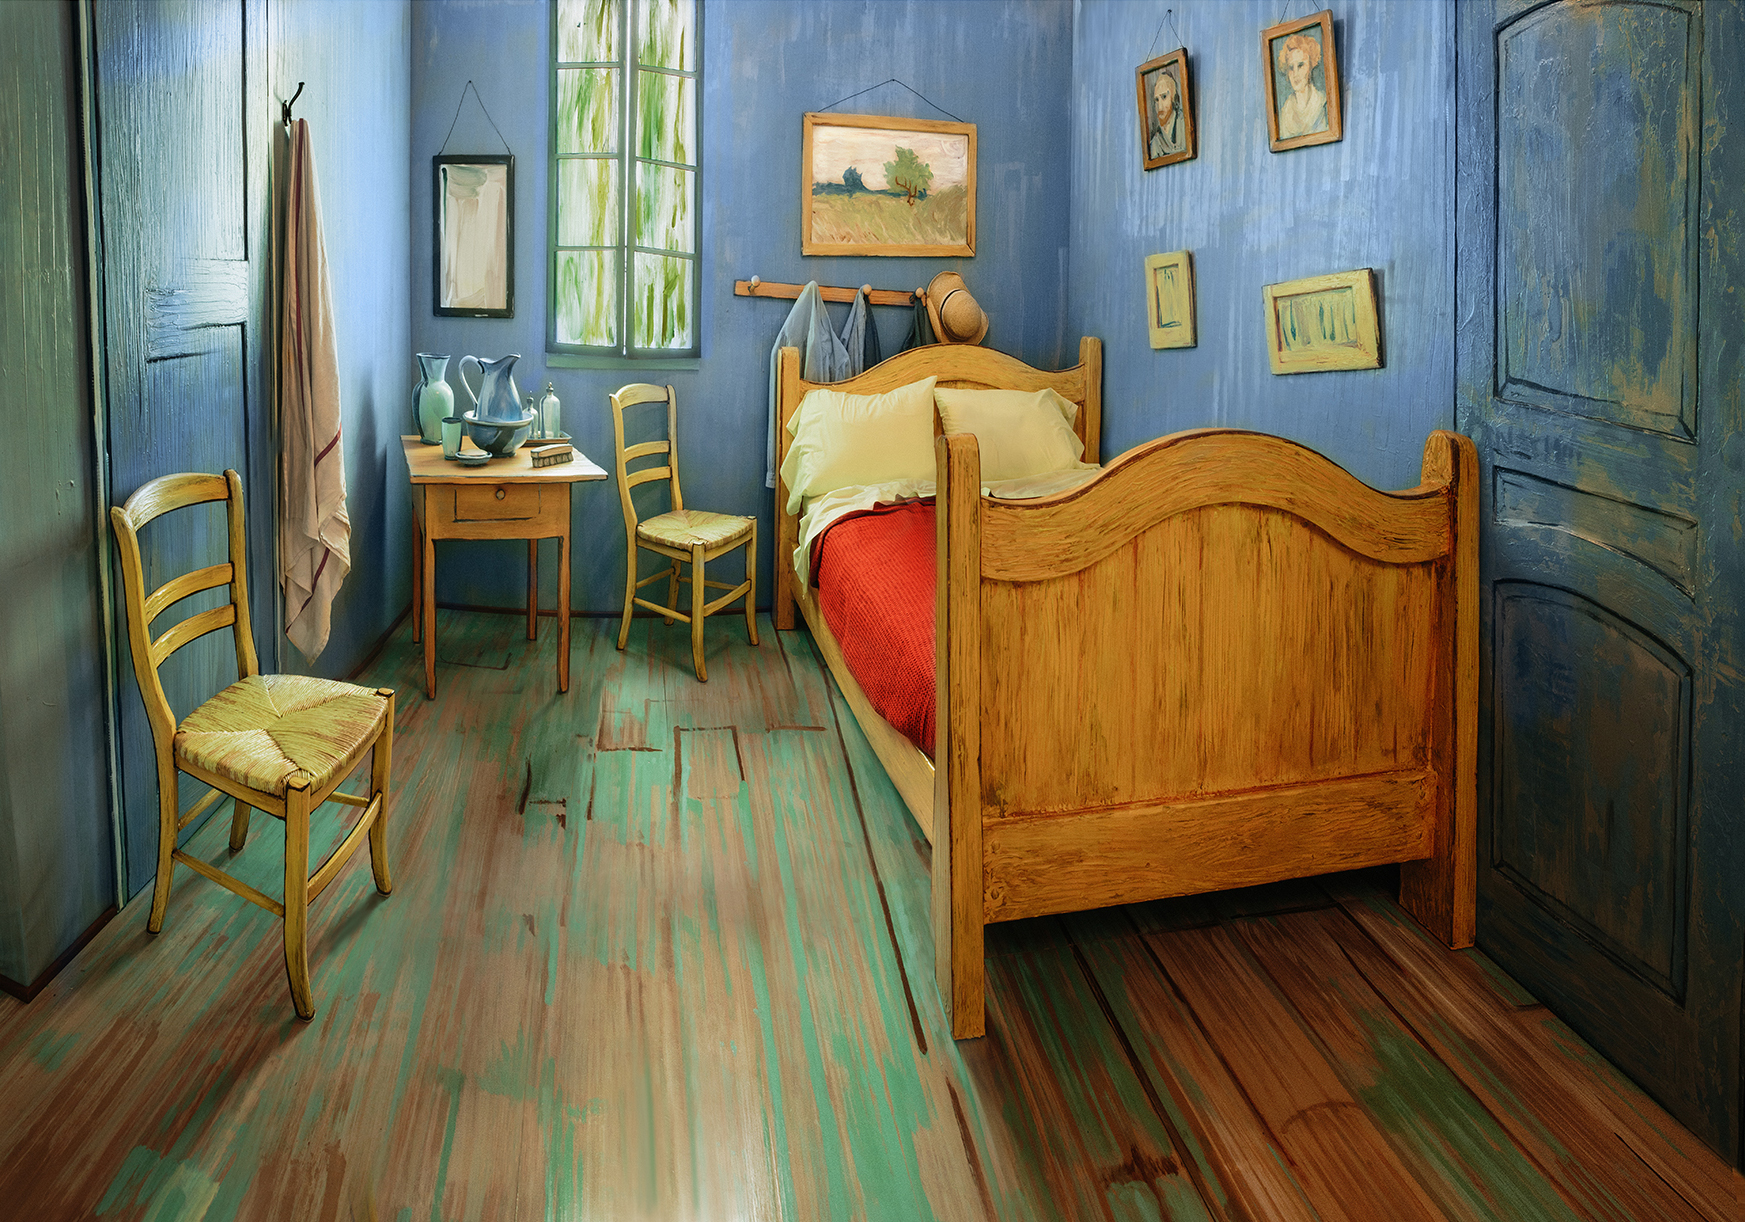 The recreation of Vincent Van Gogh's bedroom in Arles in the south of France, as it appears on Airbnb. (Art Institute of Chicago)